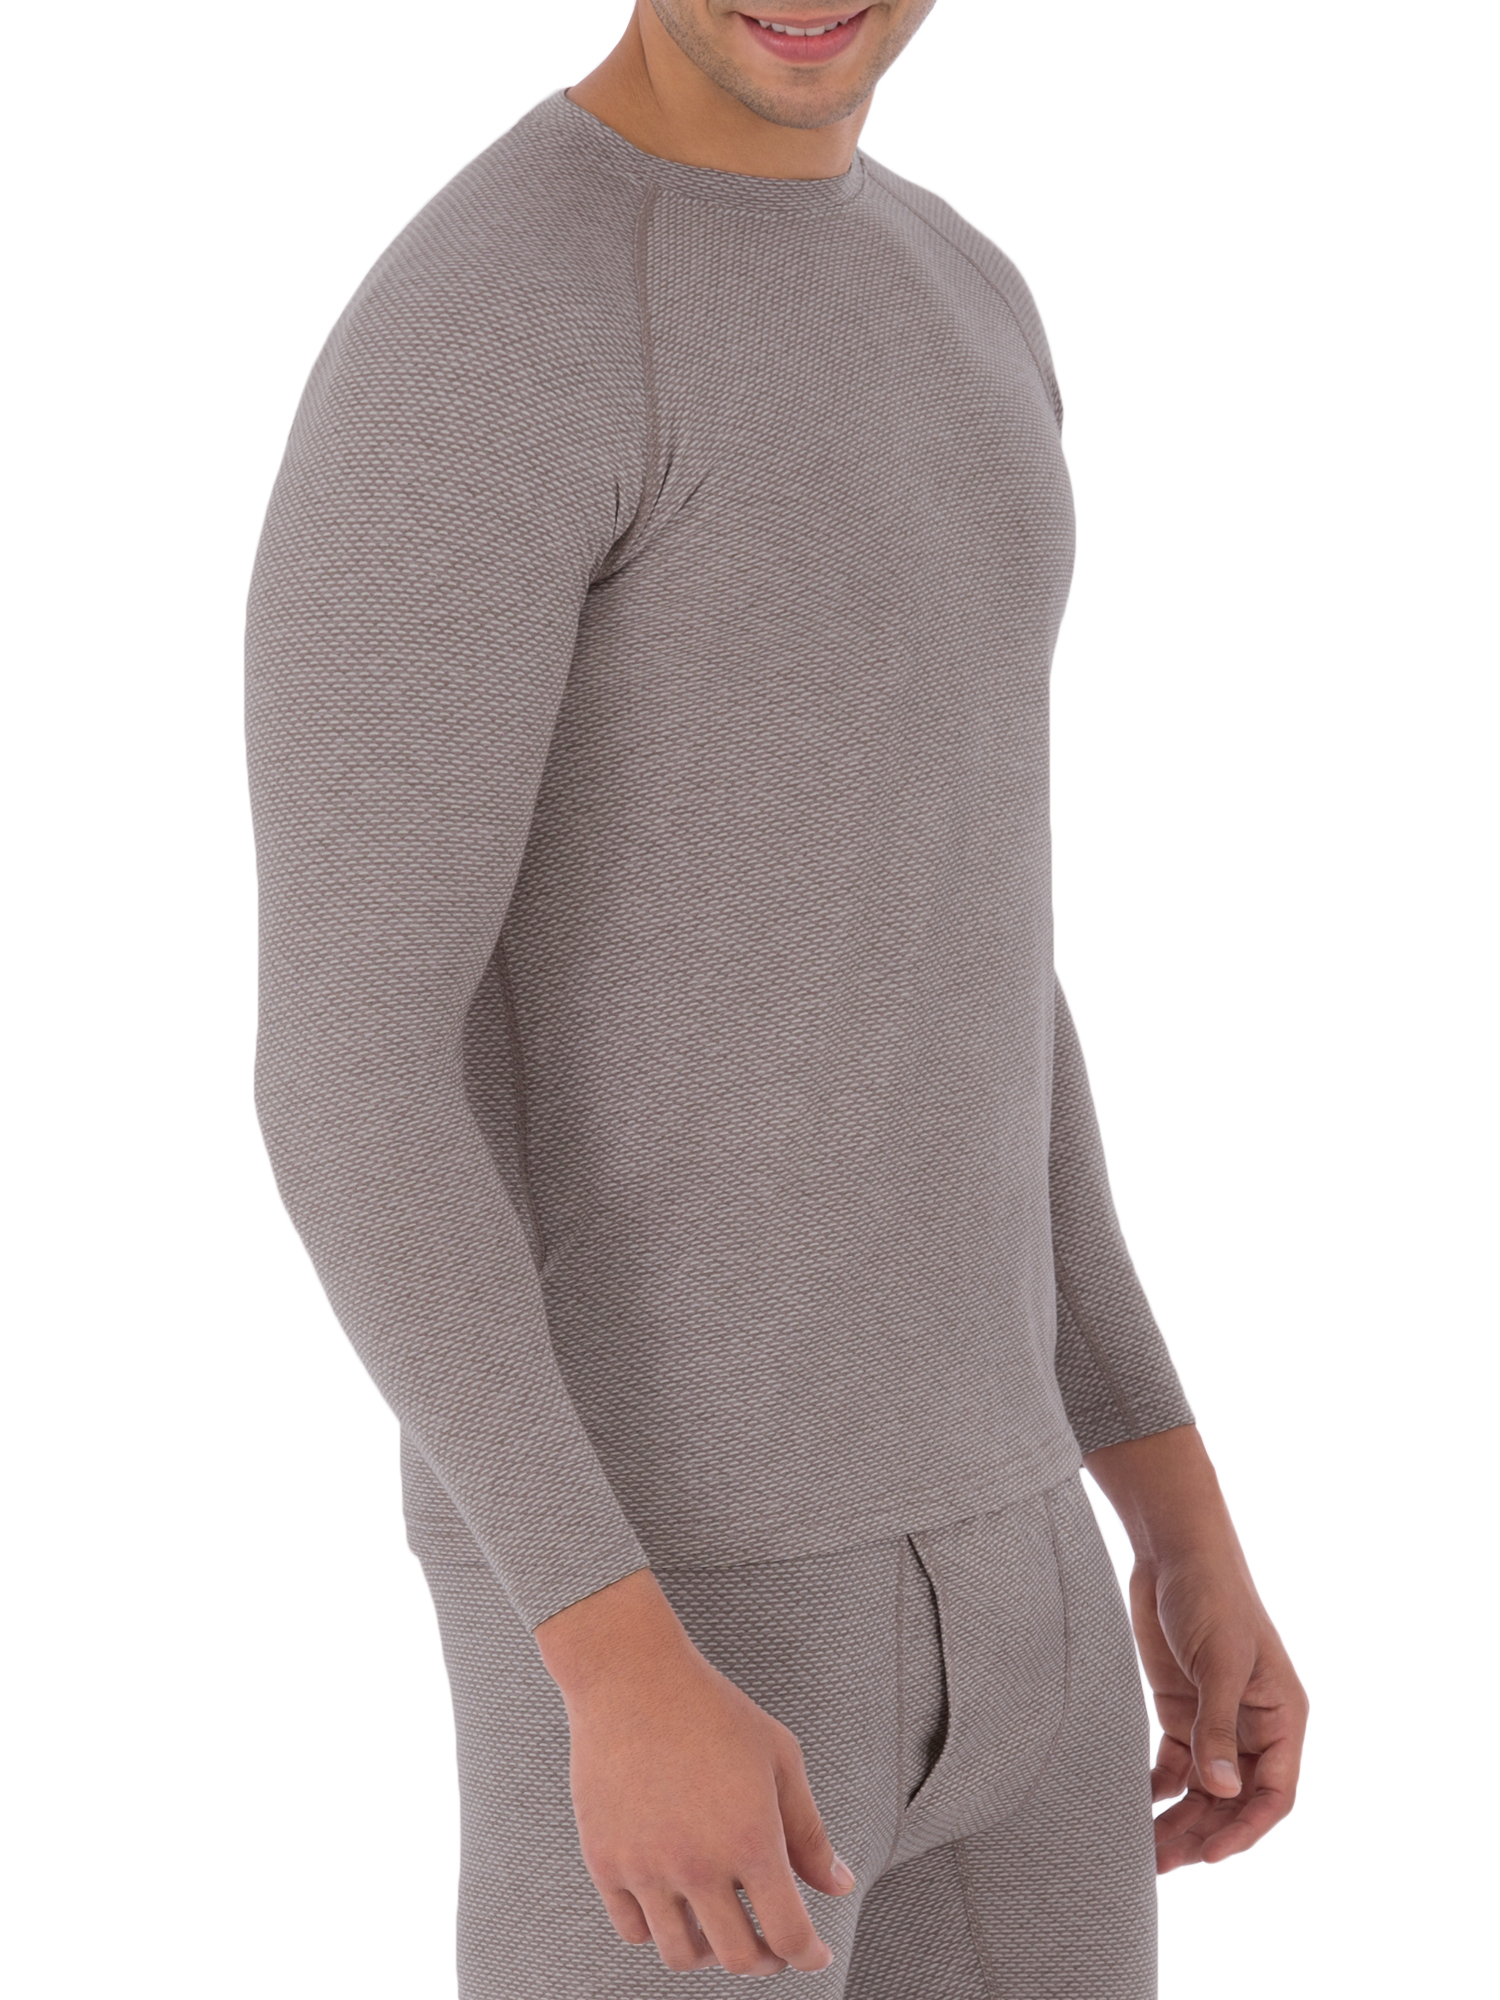 Fruit of the Loom Big Men's Breathable Super Cozy Thermal Shirt Underwear for Men - image 5 of 5